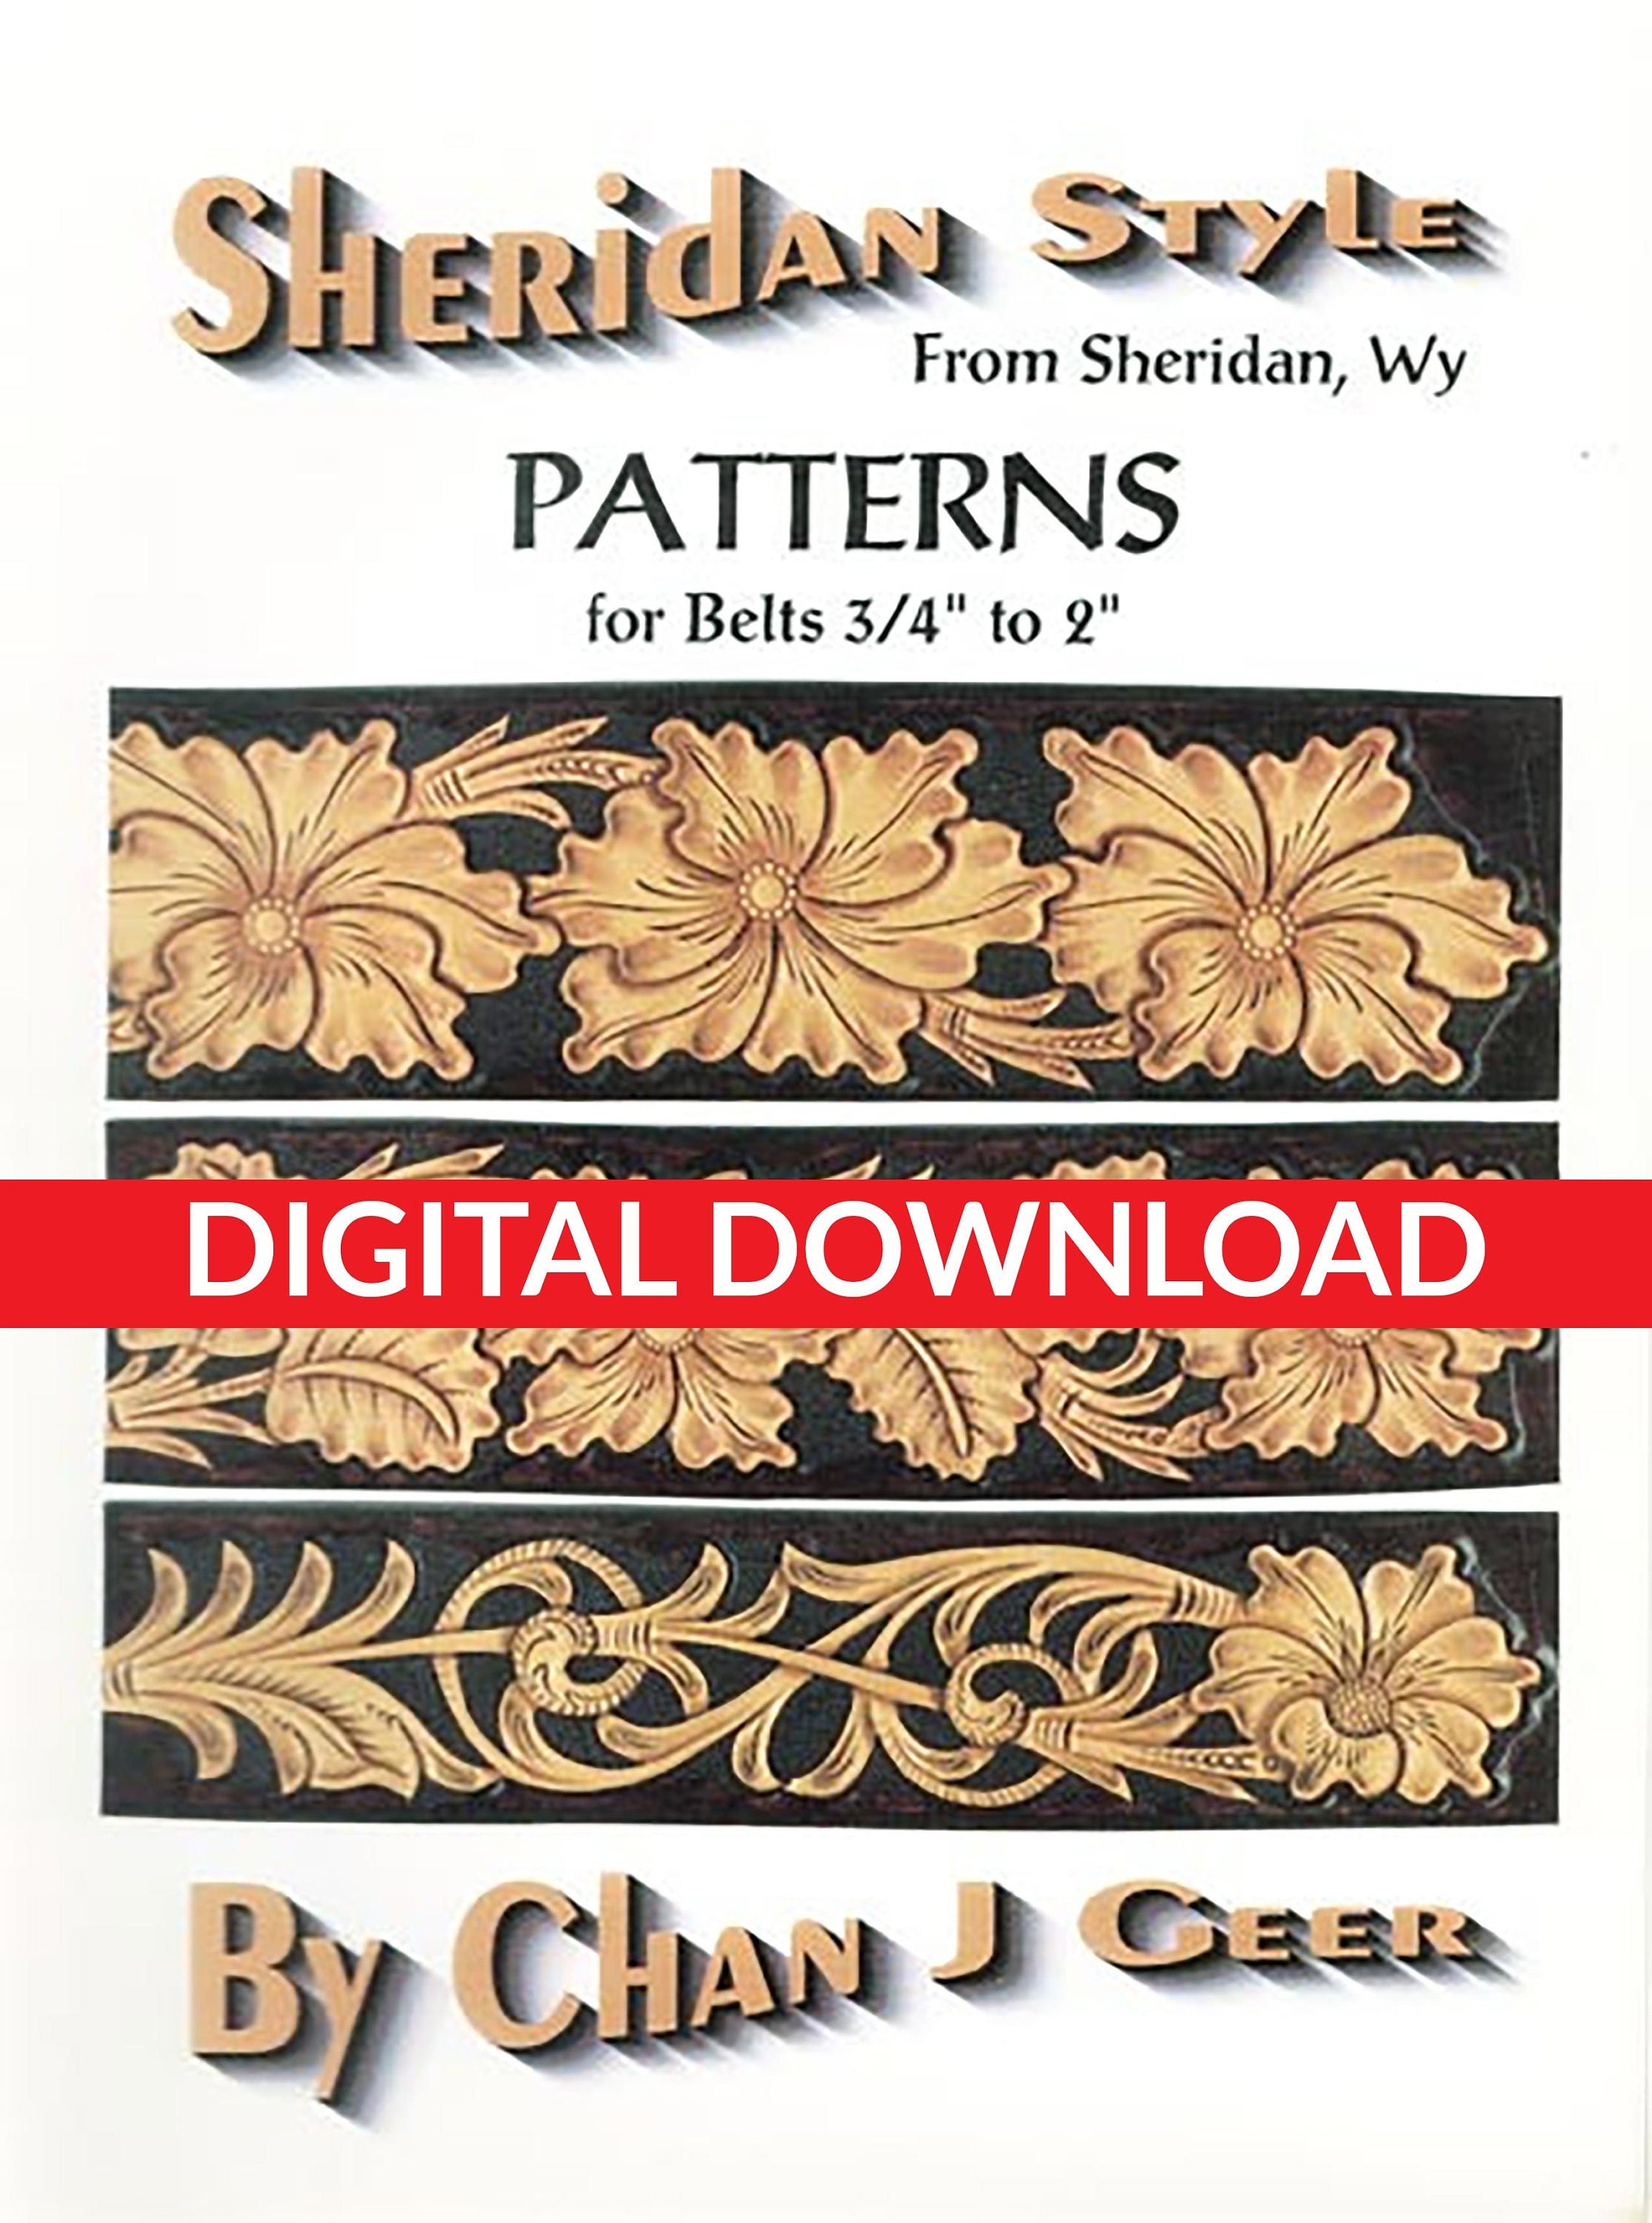 Patterns for Belts 3/4 to 2 by Chan Geer sheridan Style Leather